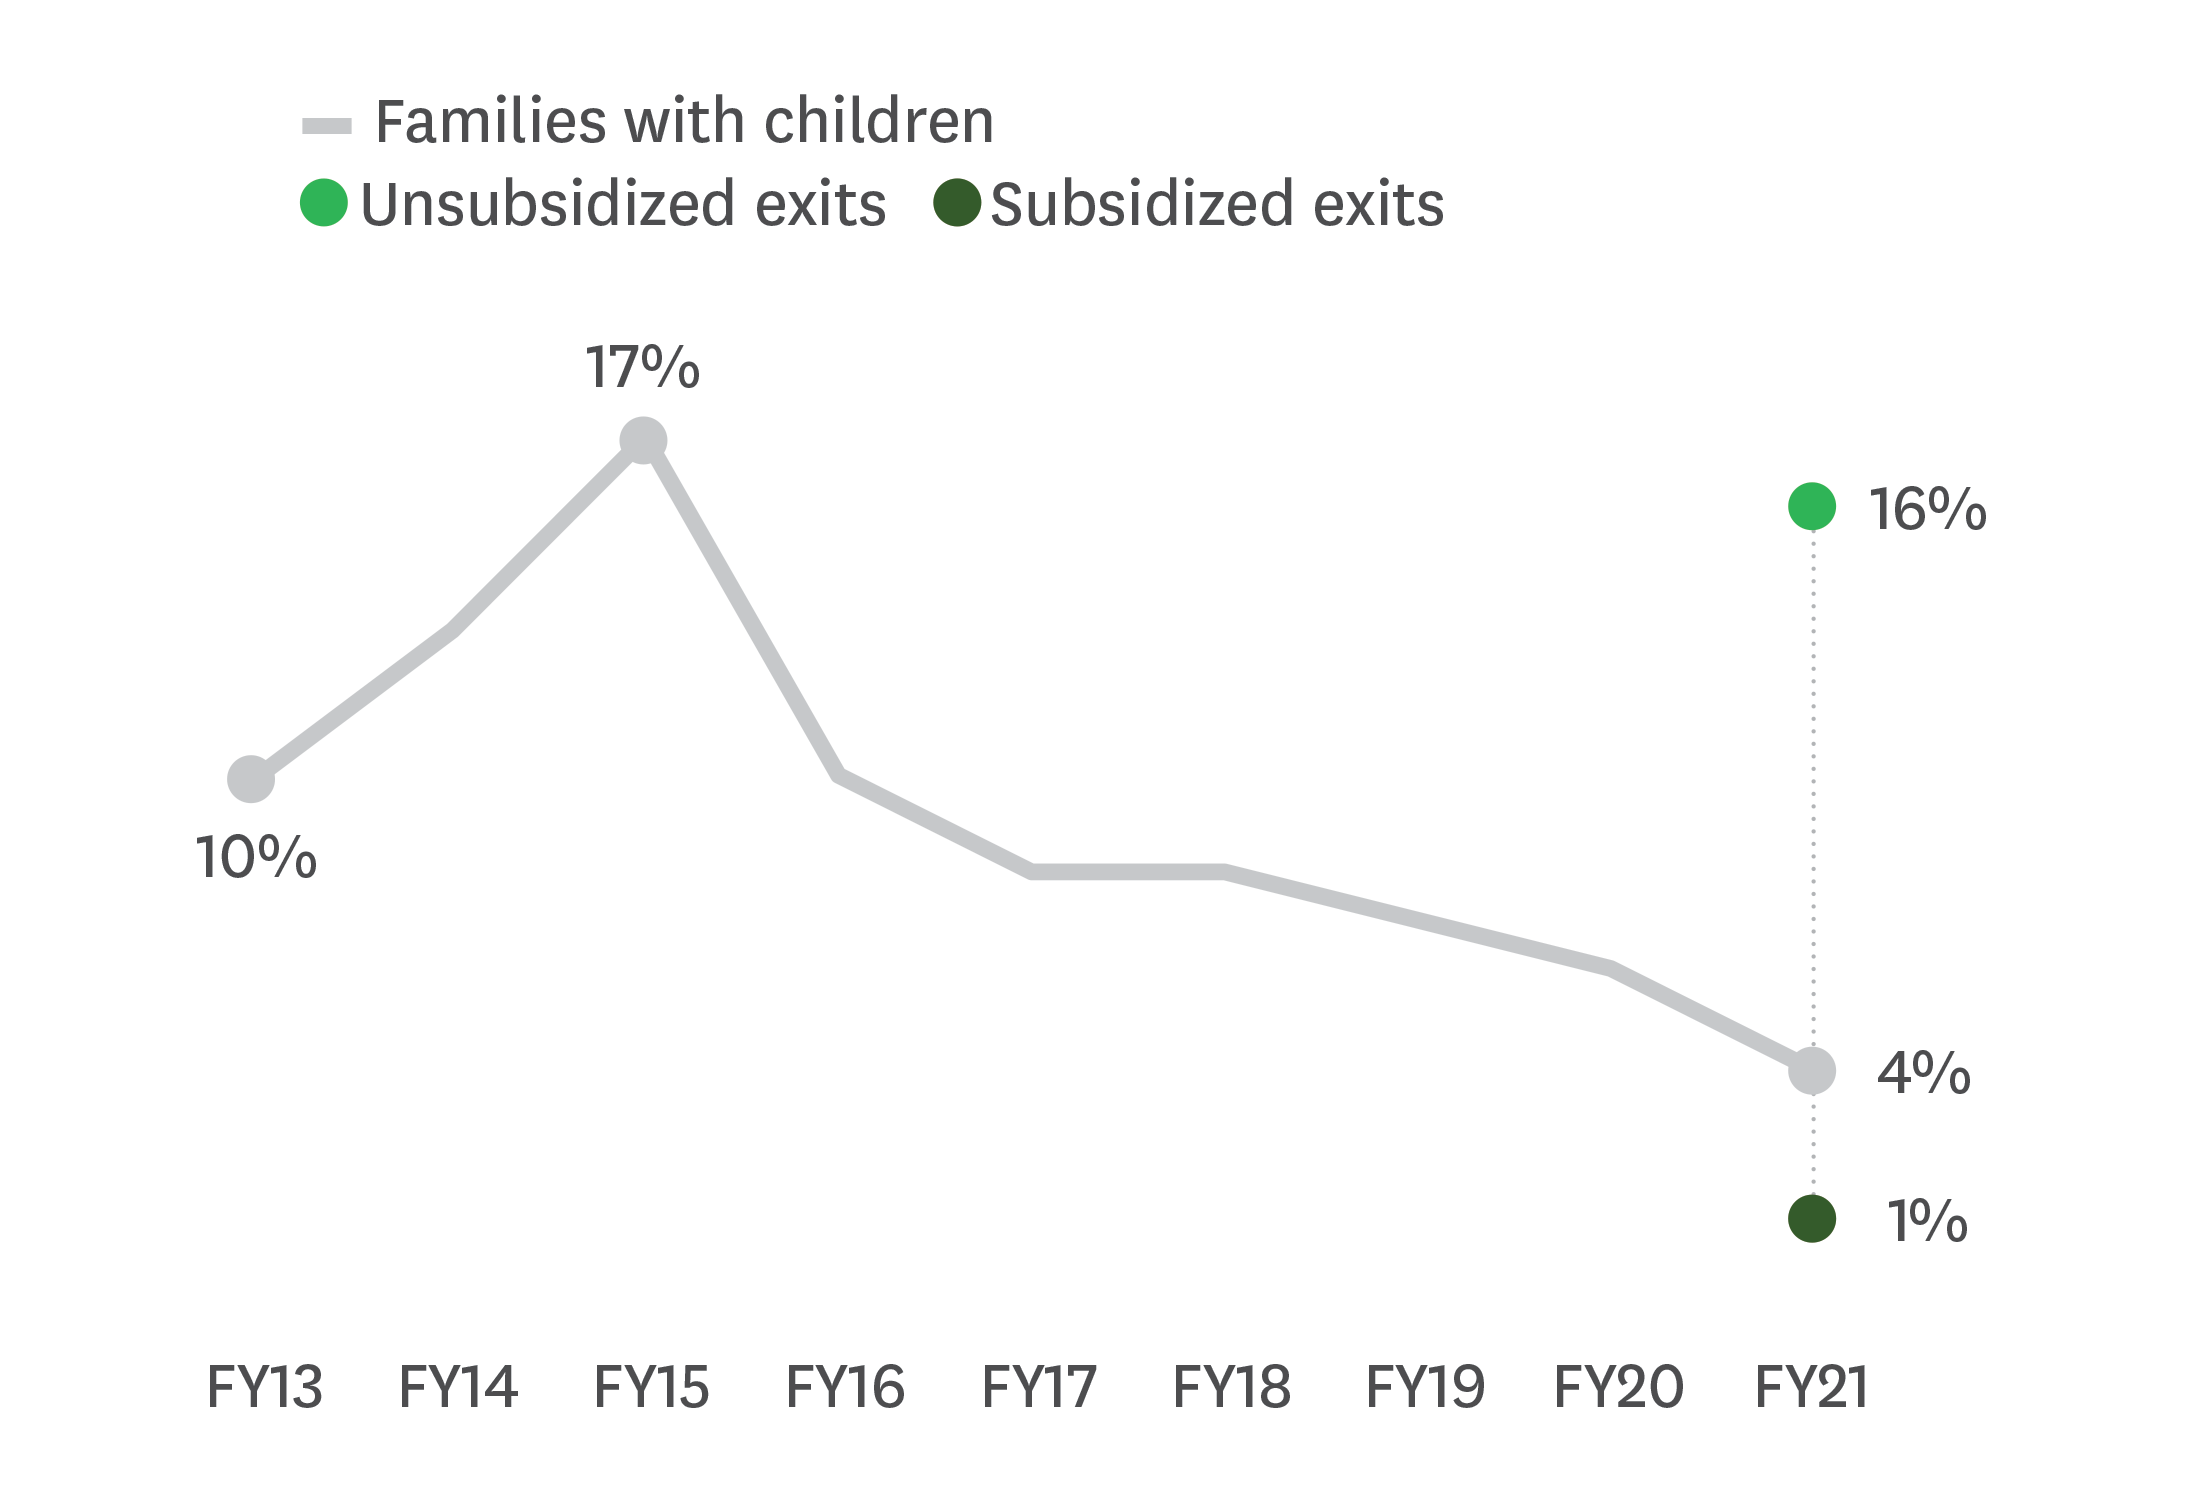 Only 1% of families who receive subsidies re-enter to the shelter system compared to 16% of families that don't receive any subsidy